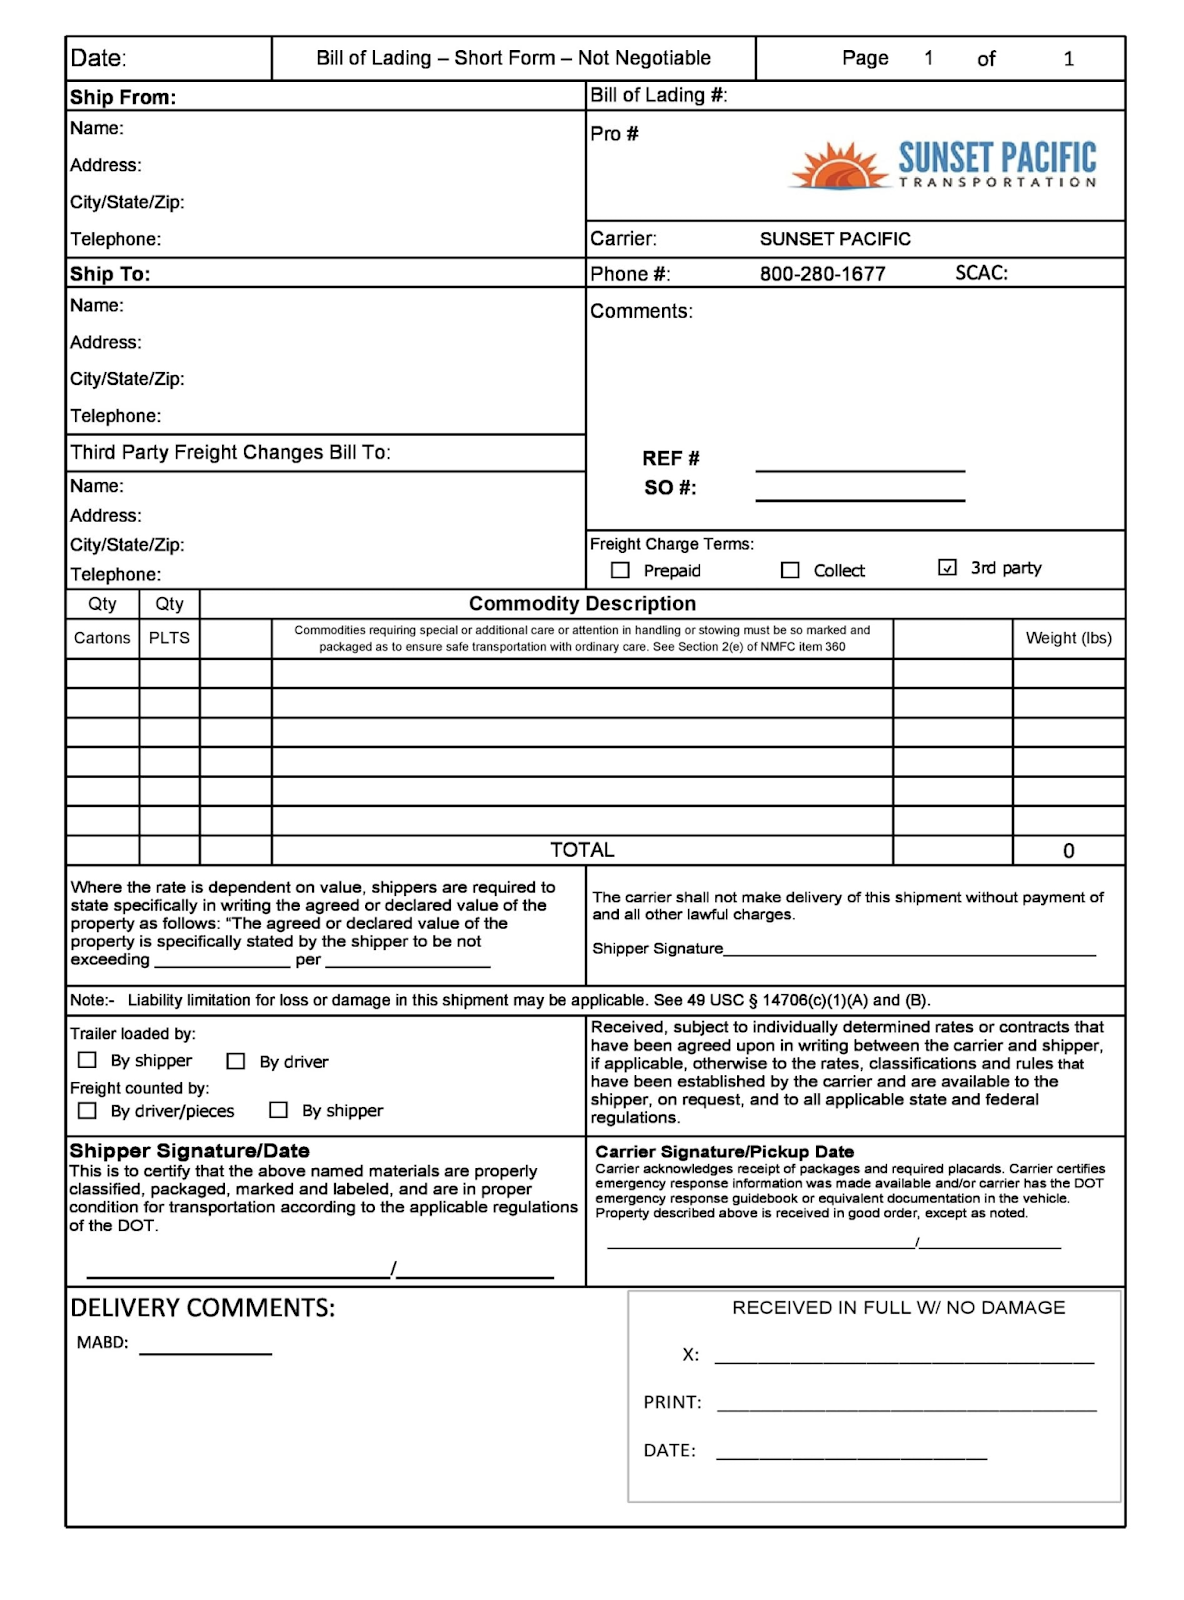 Sample of a Bill of Lading Form